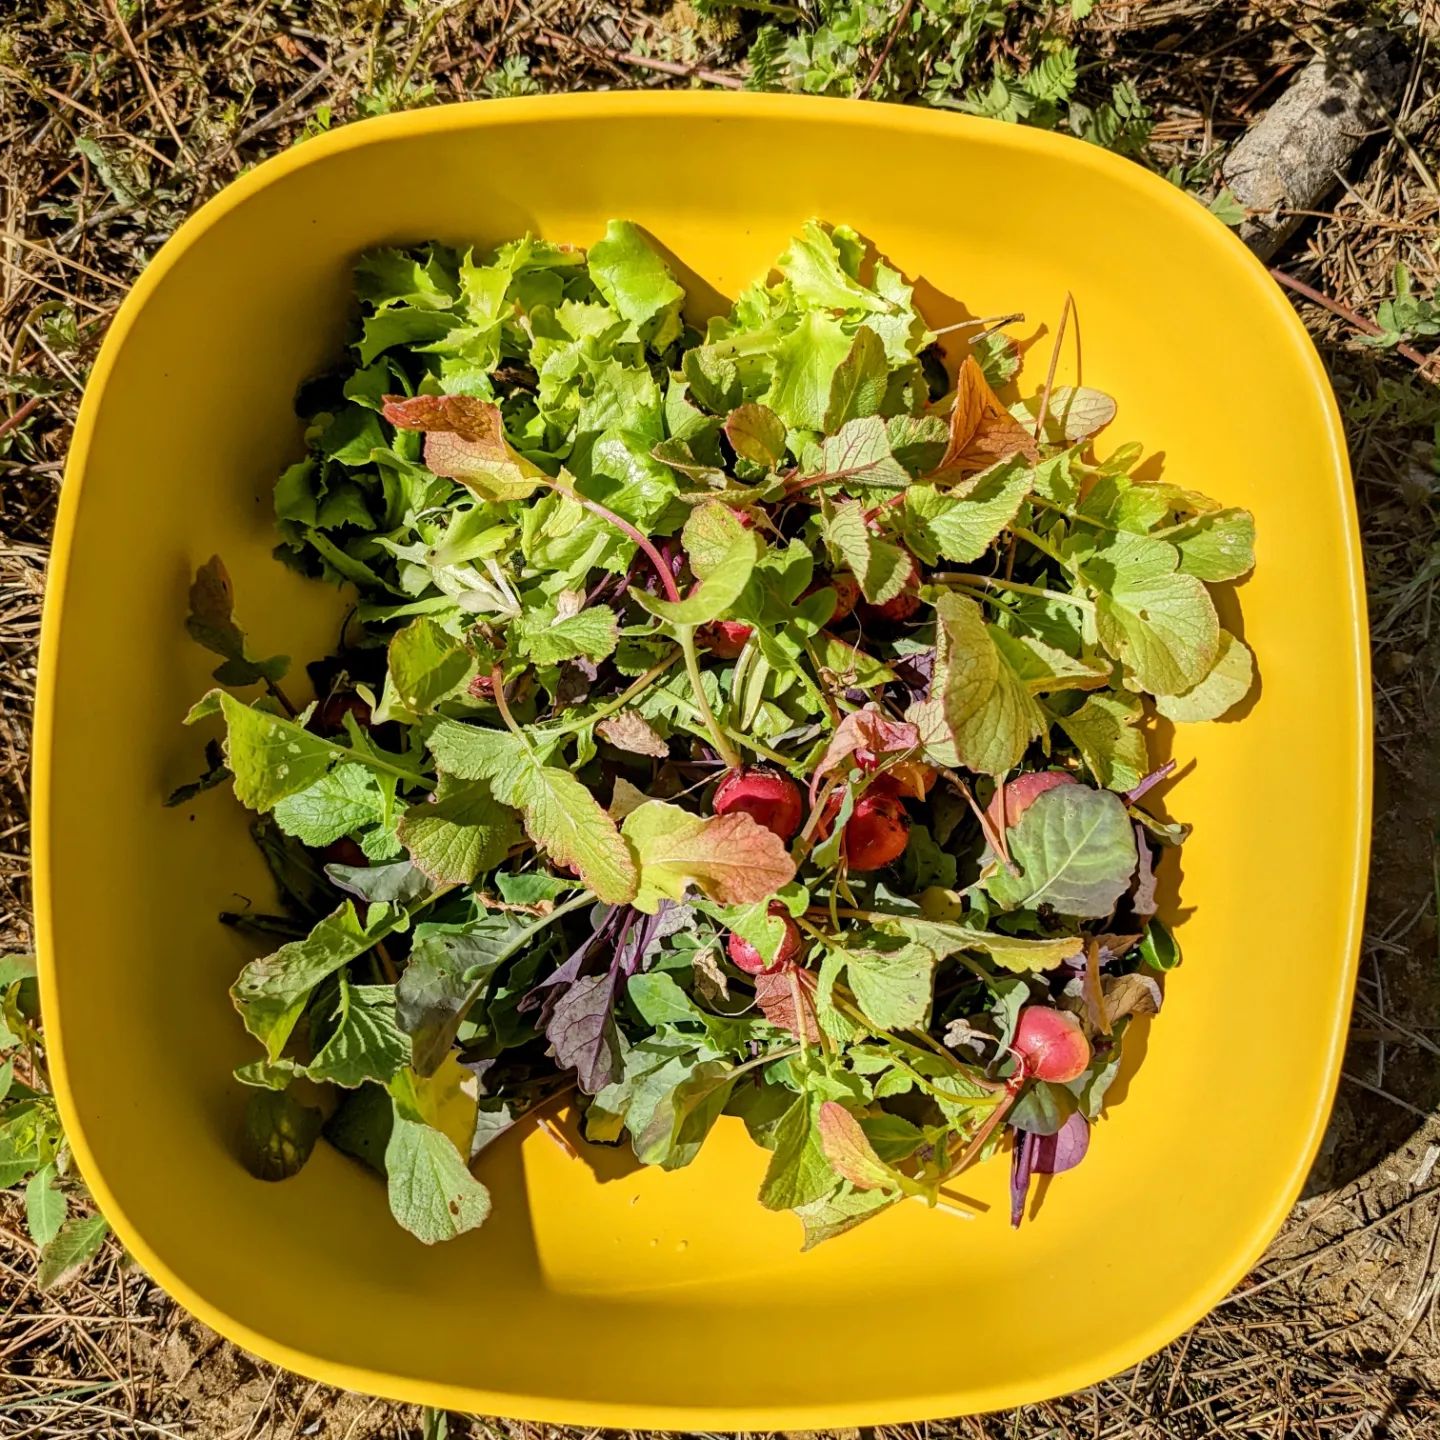 Thinned greens and radishes turned into yummy salad